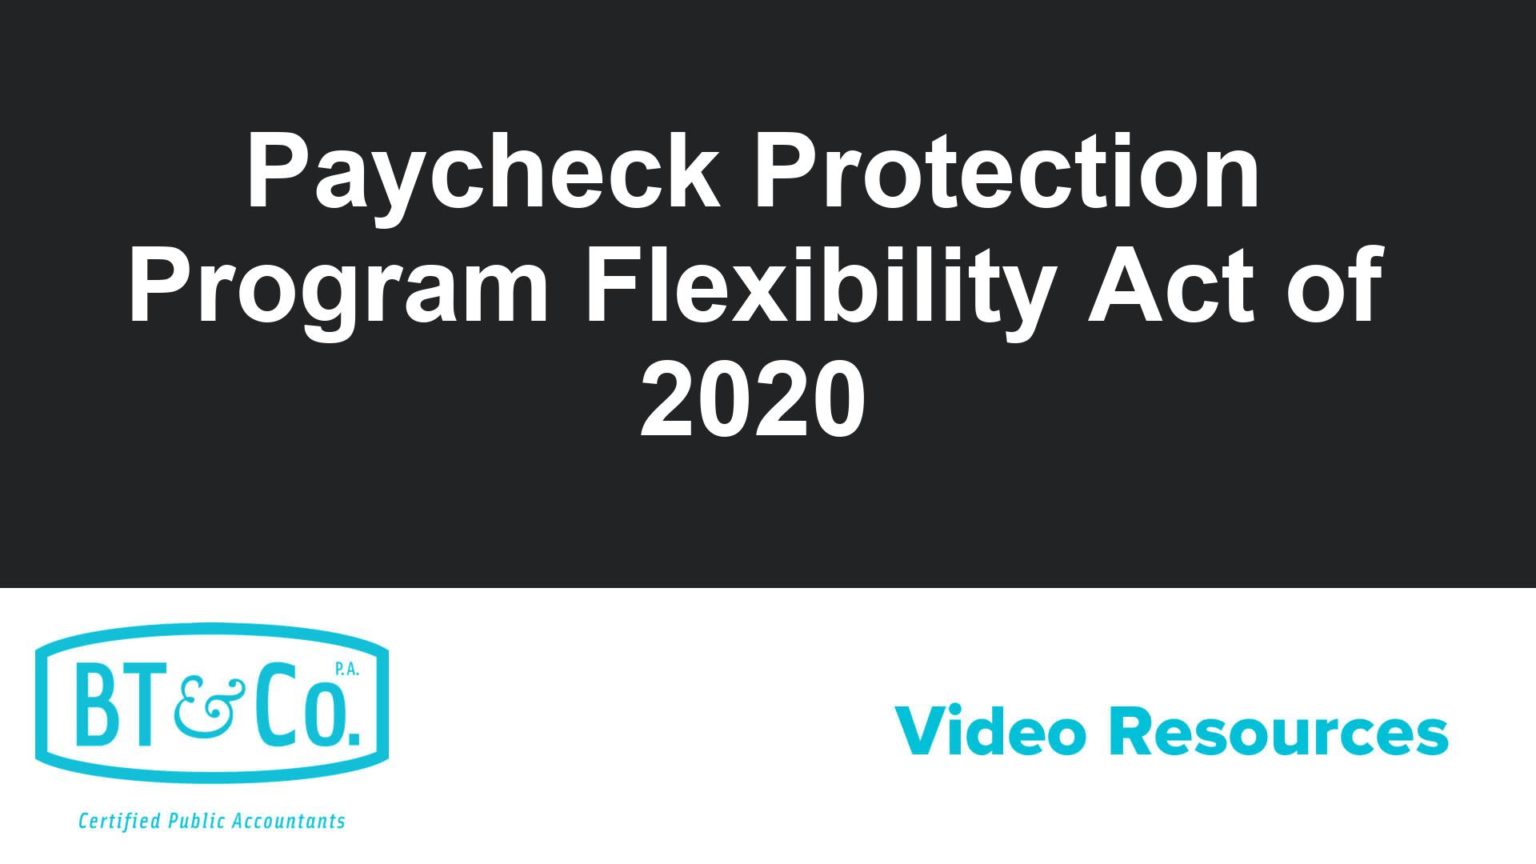 Paycheck Protection Program Flexibility Act of 2020